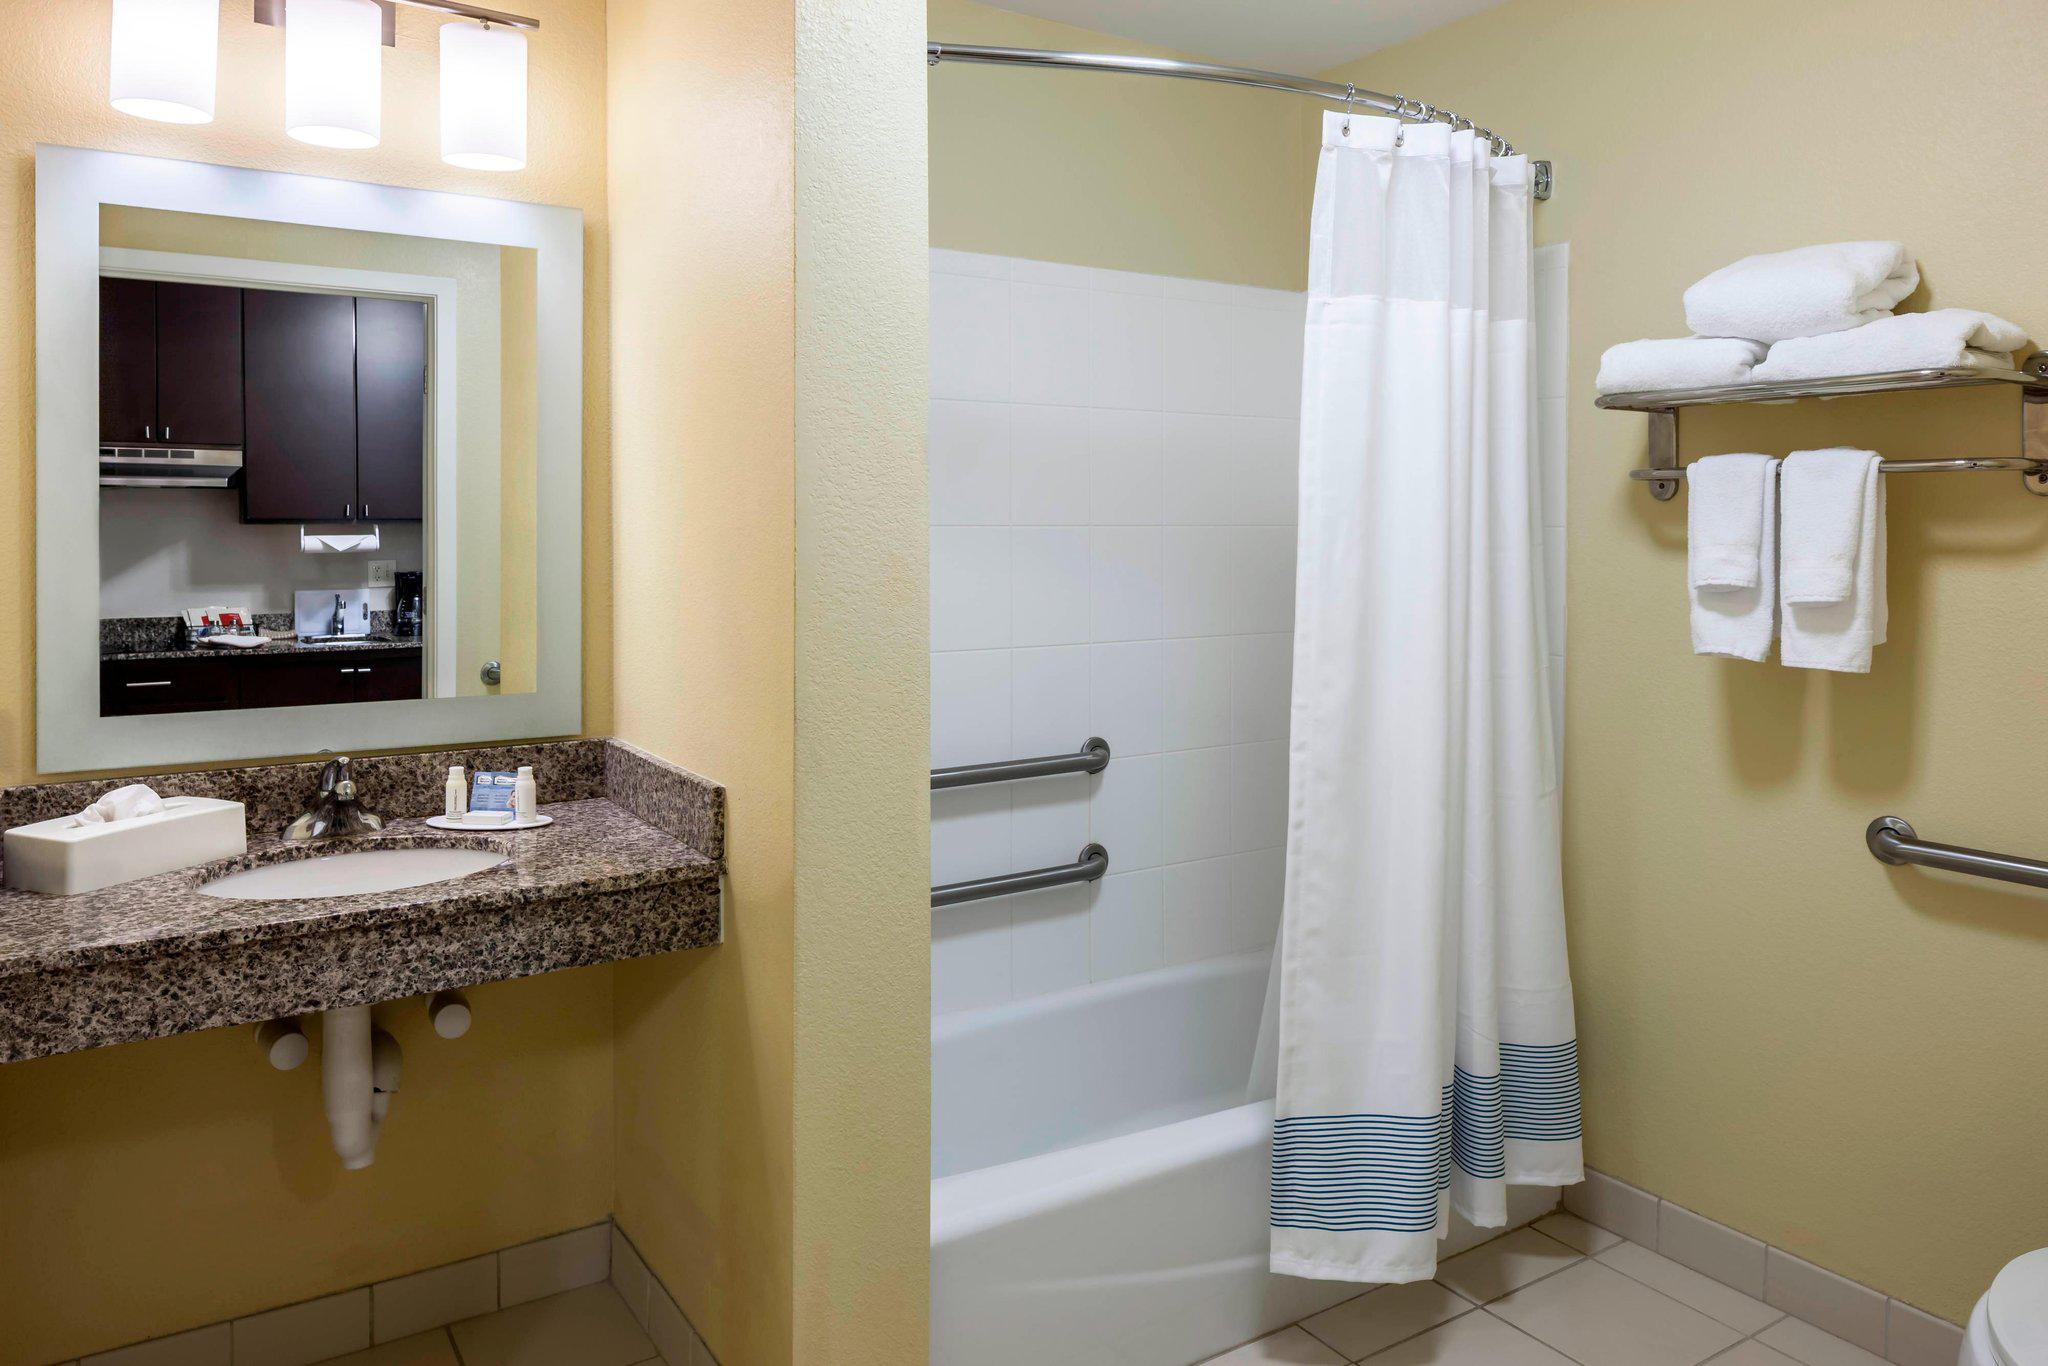 TownePlace Suites by Marriott Columbus Photo